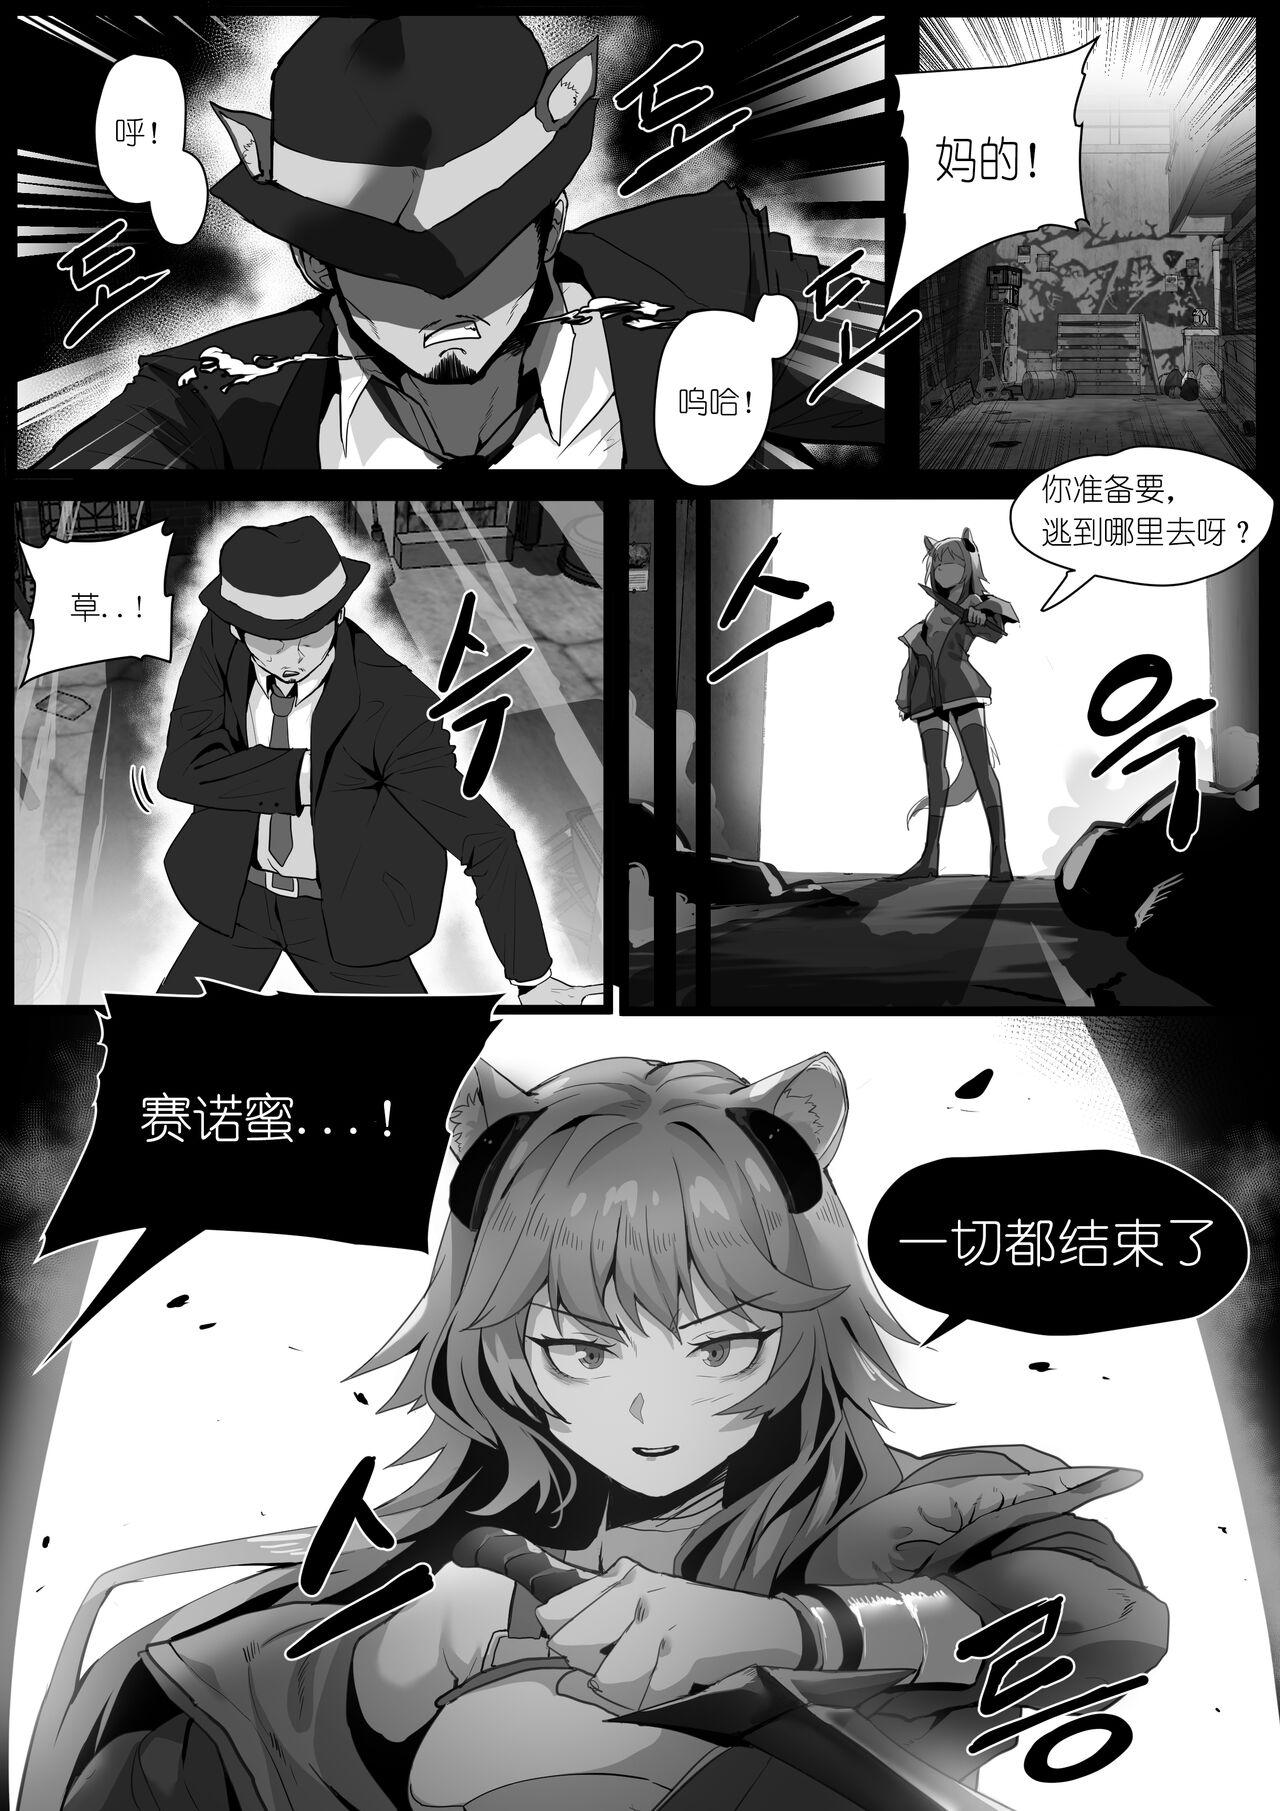 Blowing 欲望方舟记录3 - Arknights Blows - Page 8